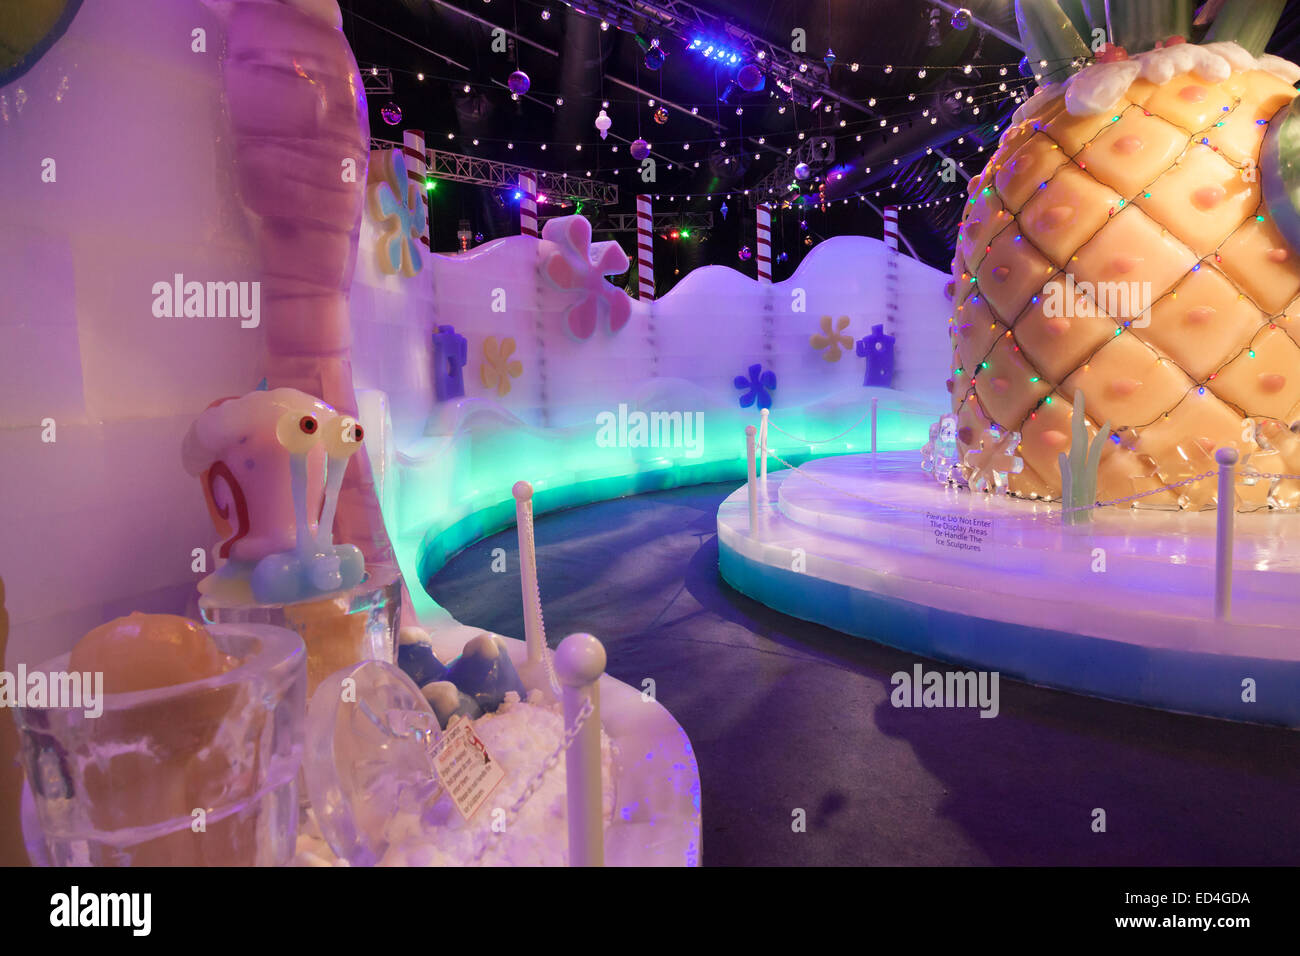 Ice Land 9 Degrees Attraction At Christmas At Moody Gardens